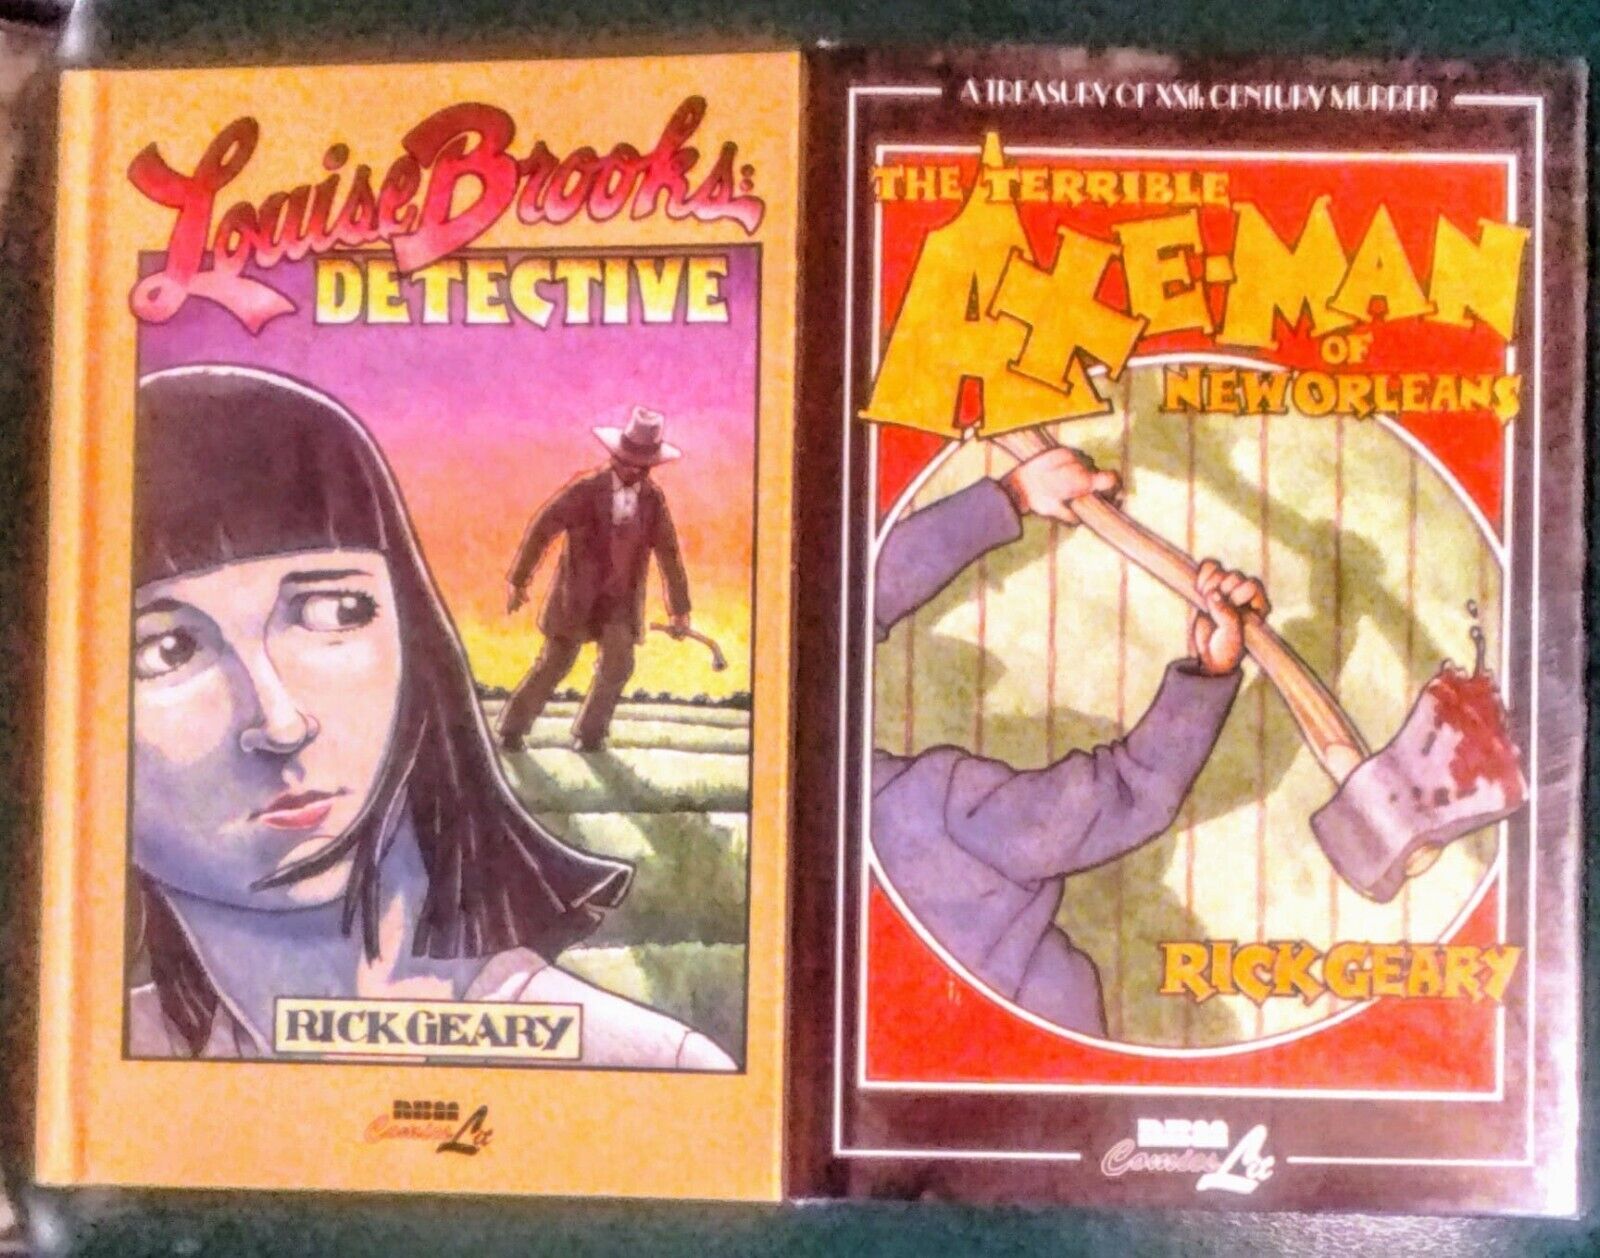 Rick Geary book lot, The Terrible Axe-Man of New Orleans/Louise Brooks Detective